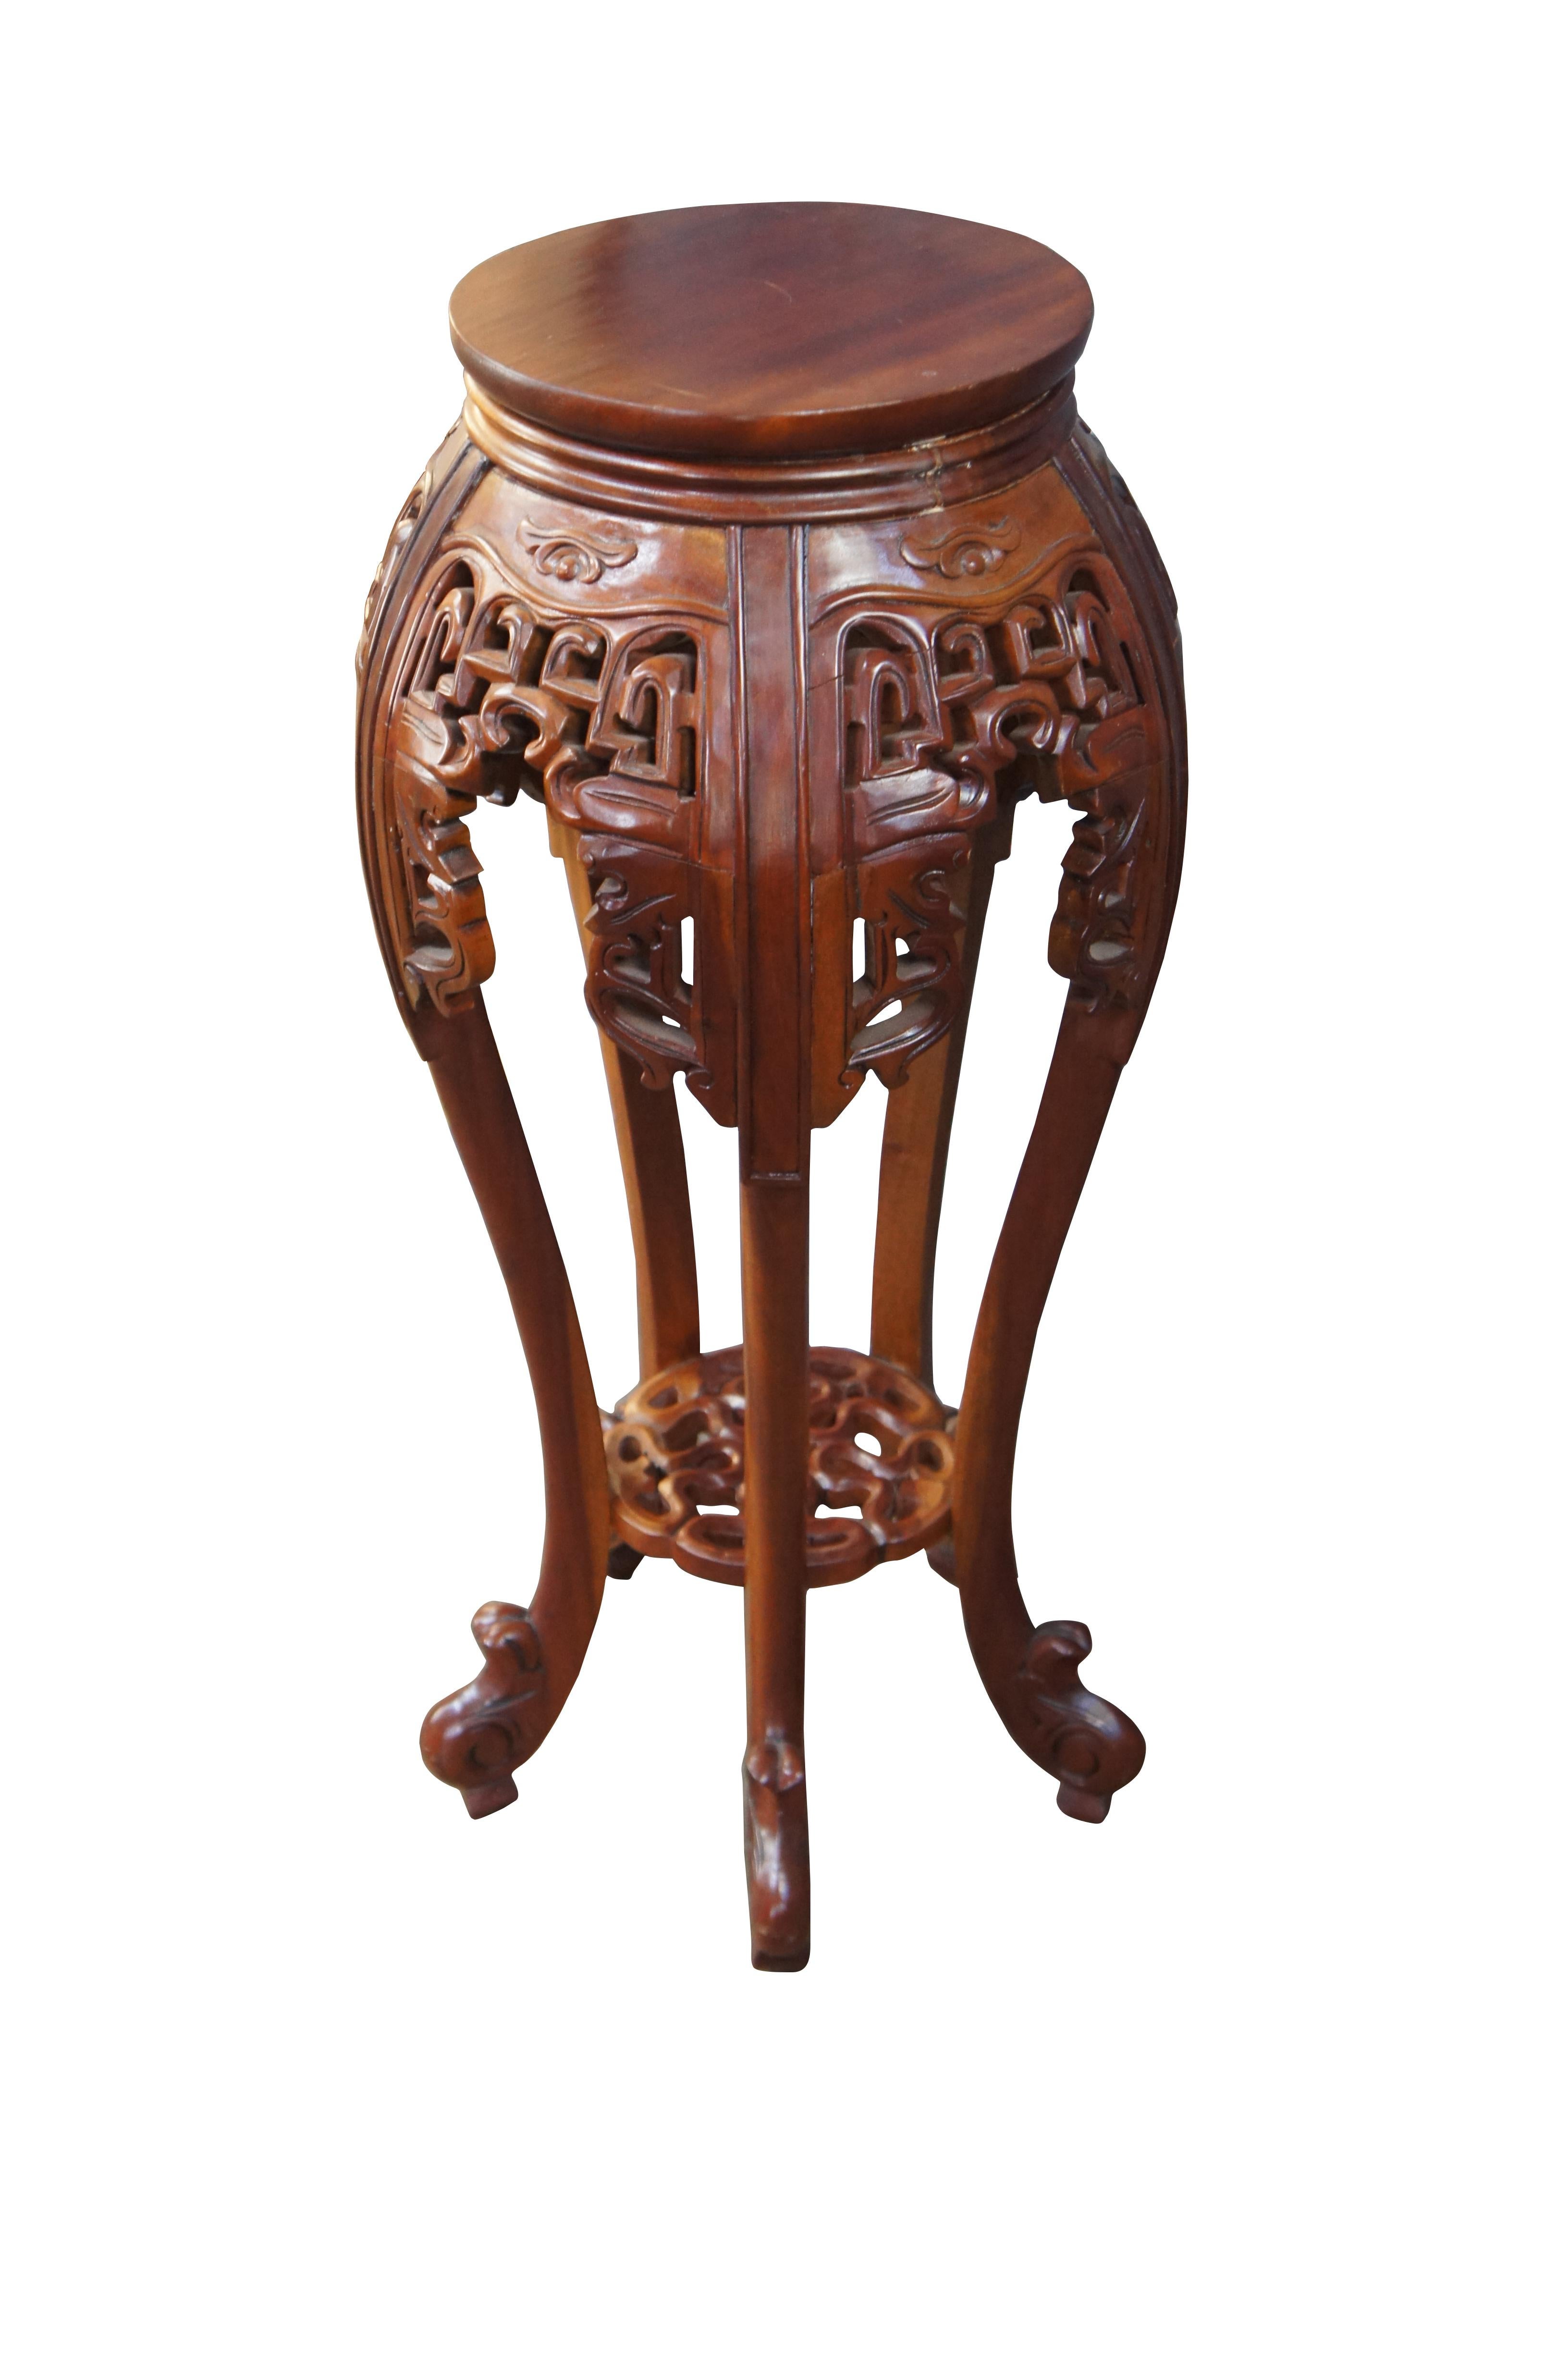 20th Century Round Chinoiserie Carved Mahogany Plant Stand Sculpture Pedestal In Good Condition For Sale In Dayton, OH